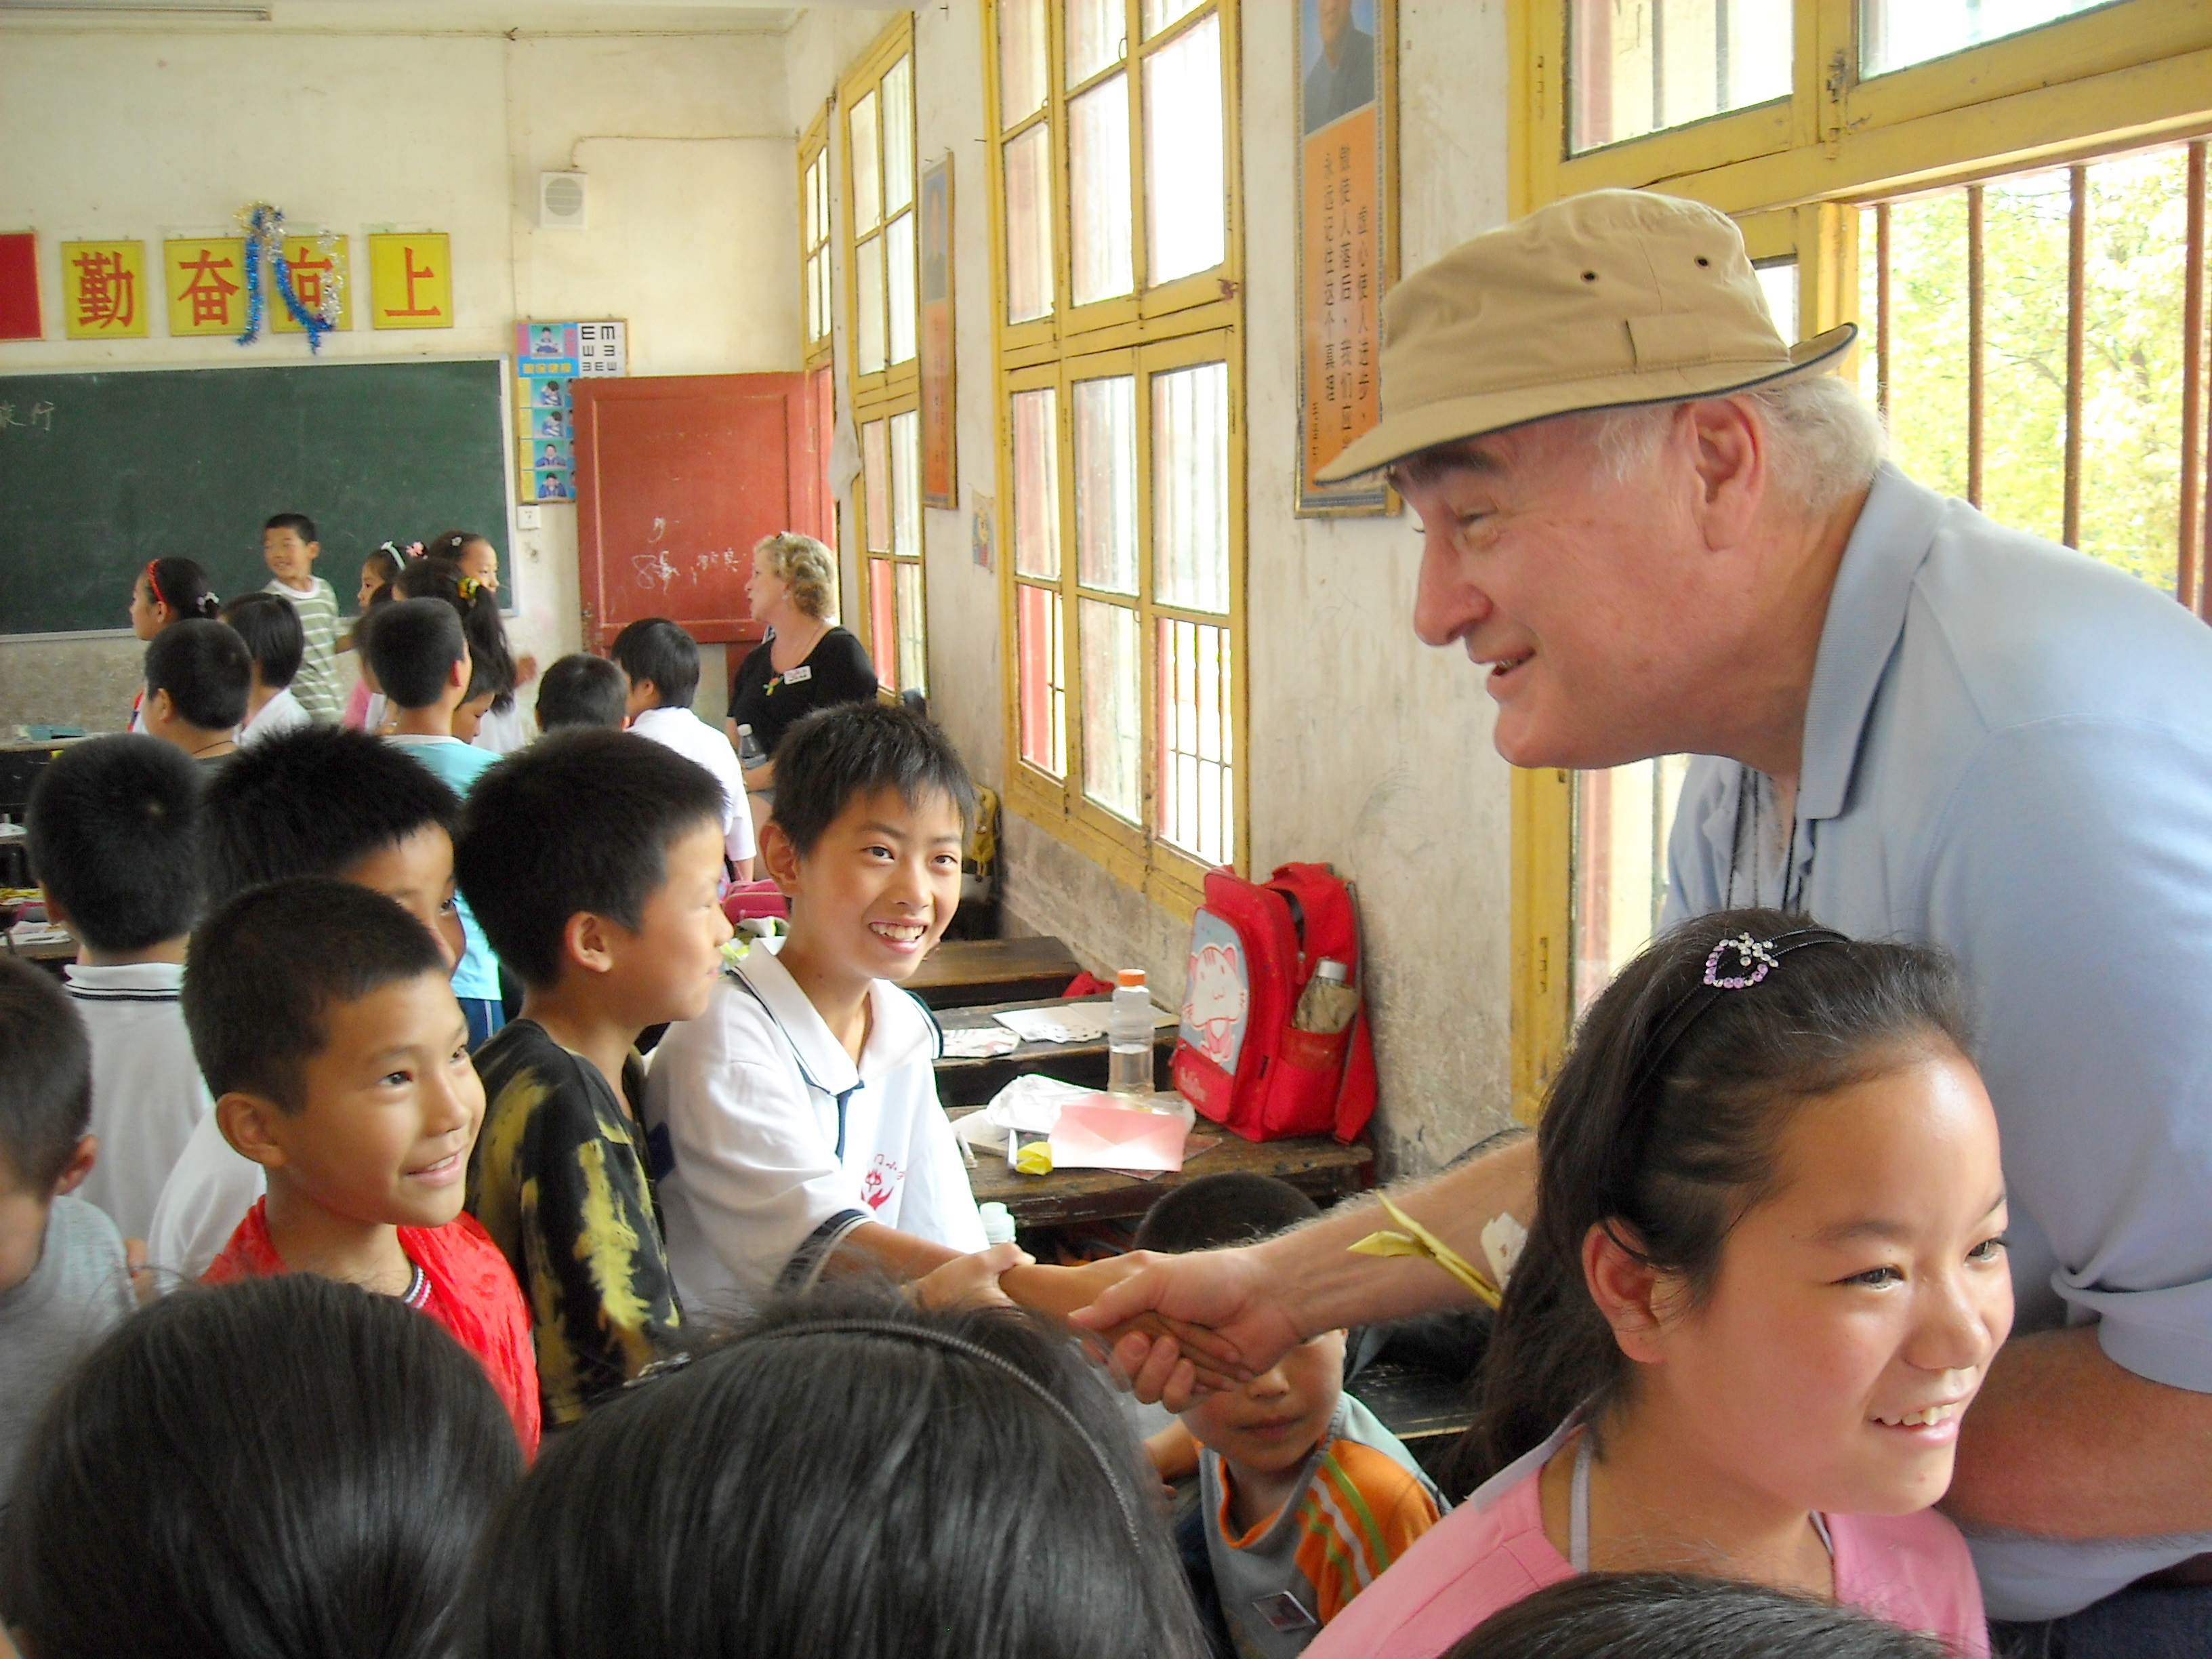 An American man shakes hands with several Asian children at their school.